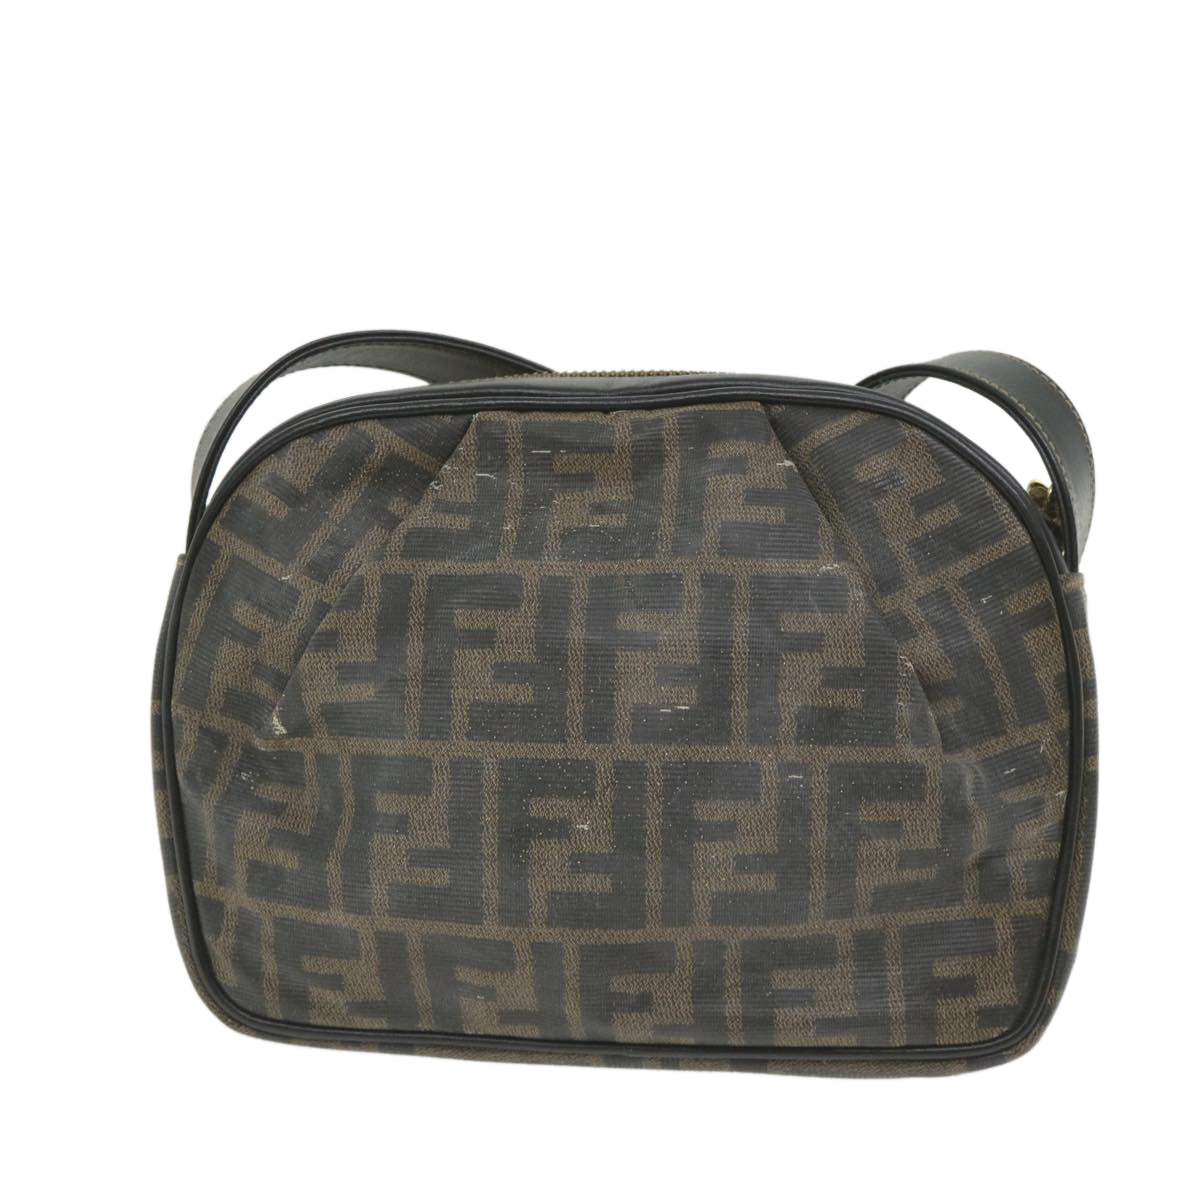 FENDI Zucca Canvas Shoulder Bag Coated Canvas Brown Auth bs9073 - 0